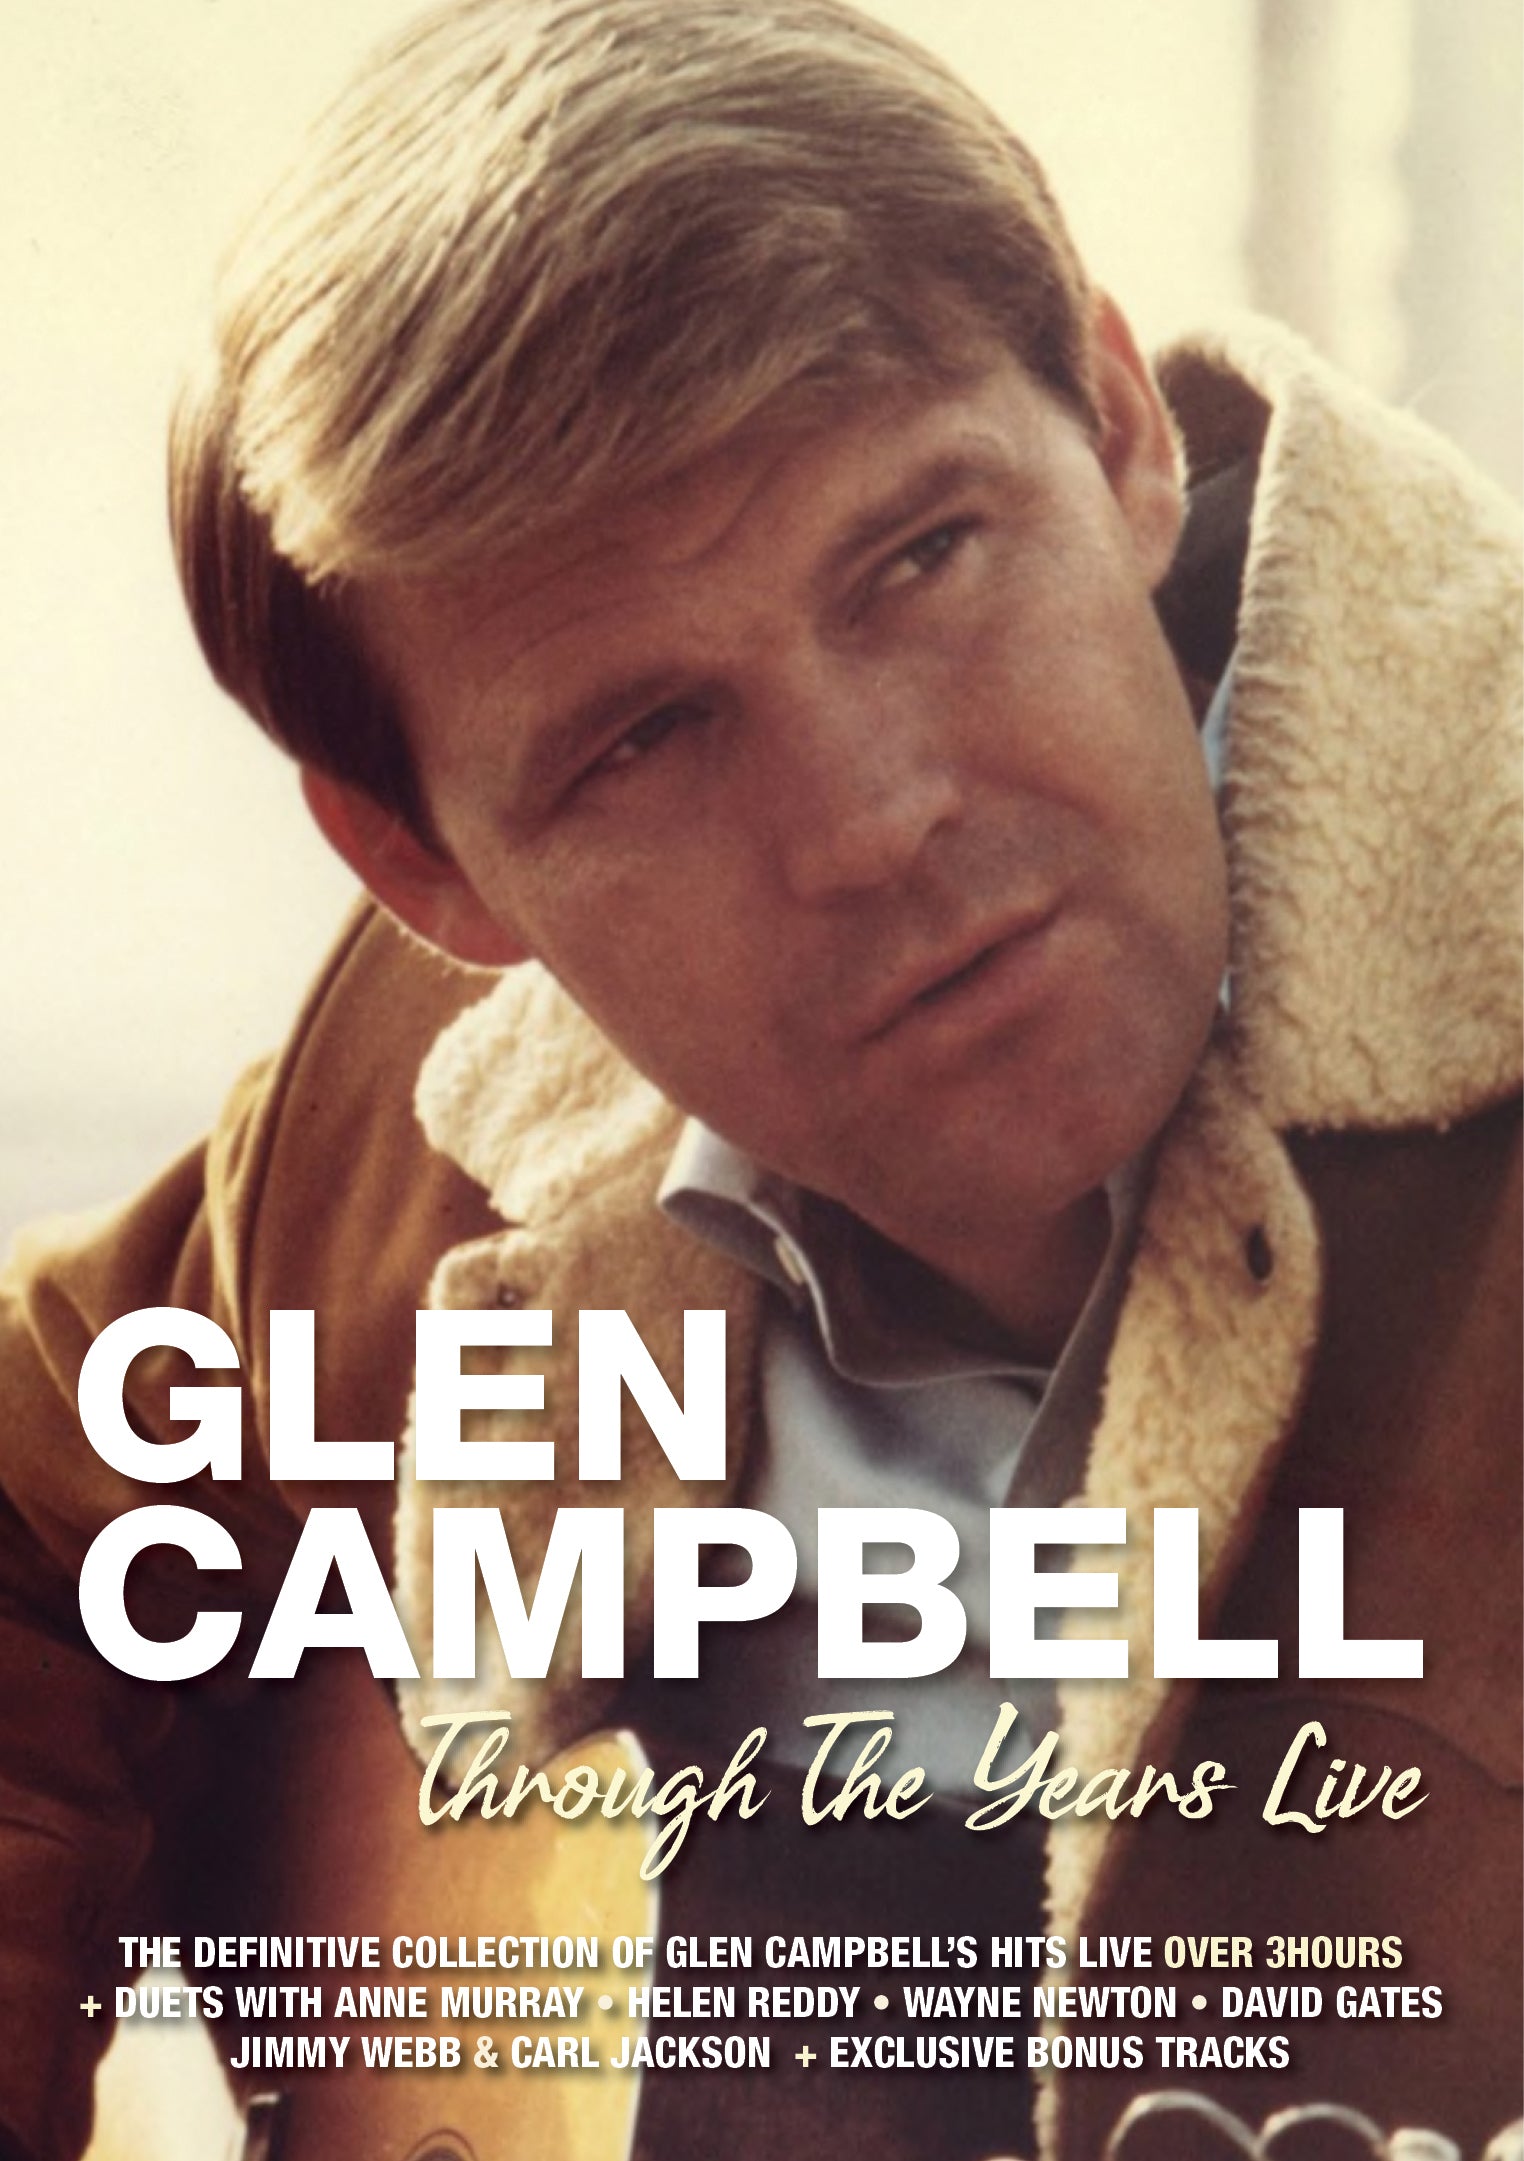 GLEN CAMPBELL - THROUGH THE YEARS (LIVE)